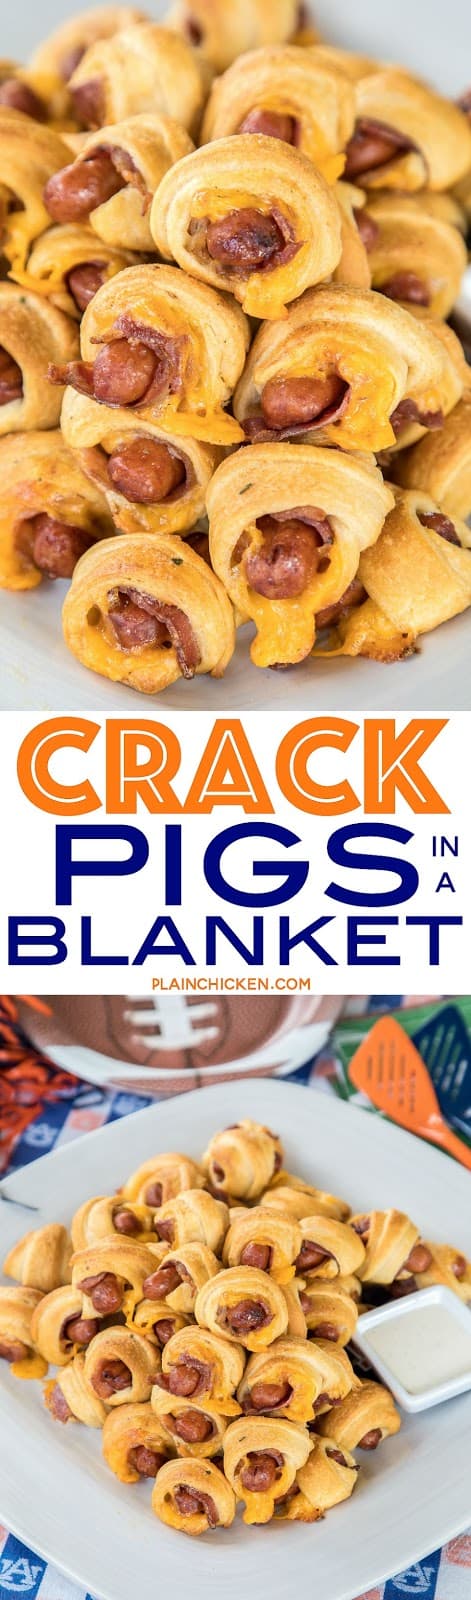 Crack Pigs in a Blanket - pigs in a blanket loaded with cheddar, bacon and ranch - OH MY GOODNESS!!! Only 5 ingredients and ready in about 15 minutes. Great for parties! These things FLY off the plate!!! I almost always double the recipe! #superbowl #tailgating #pigsinablanket